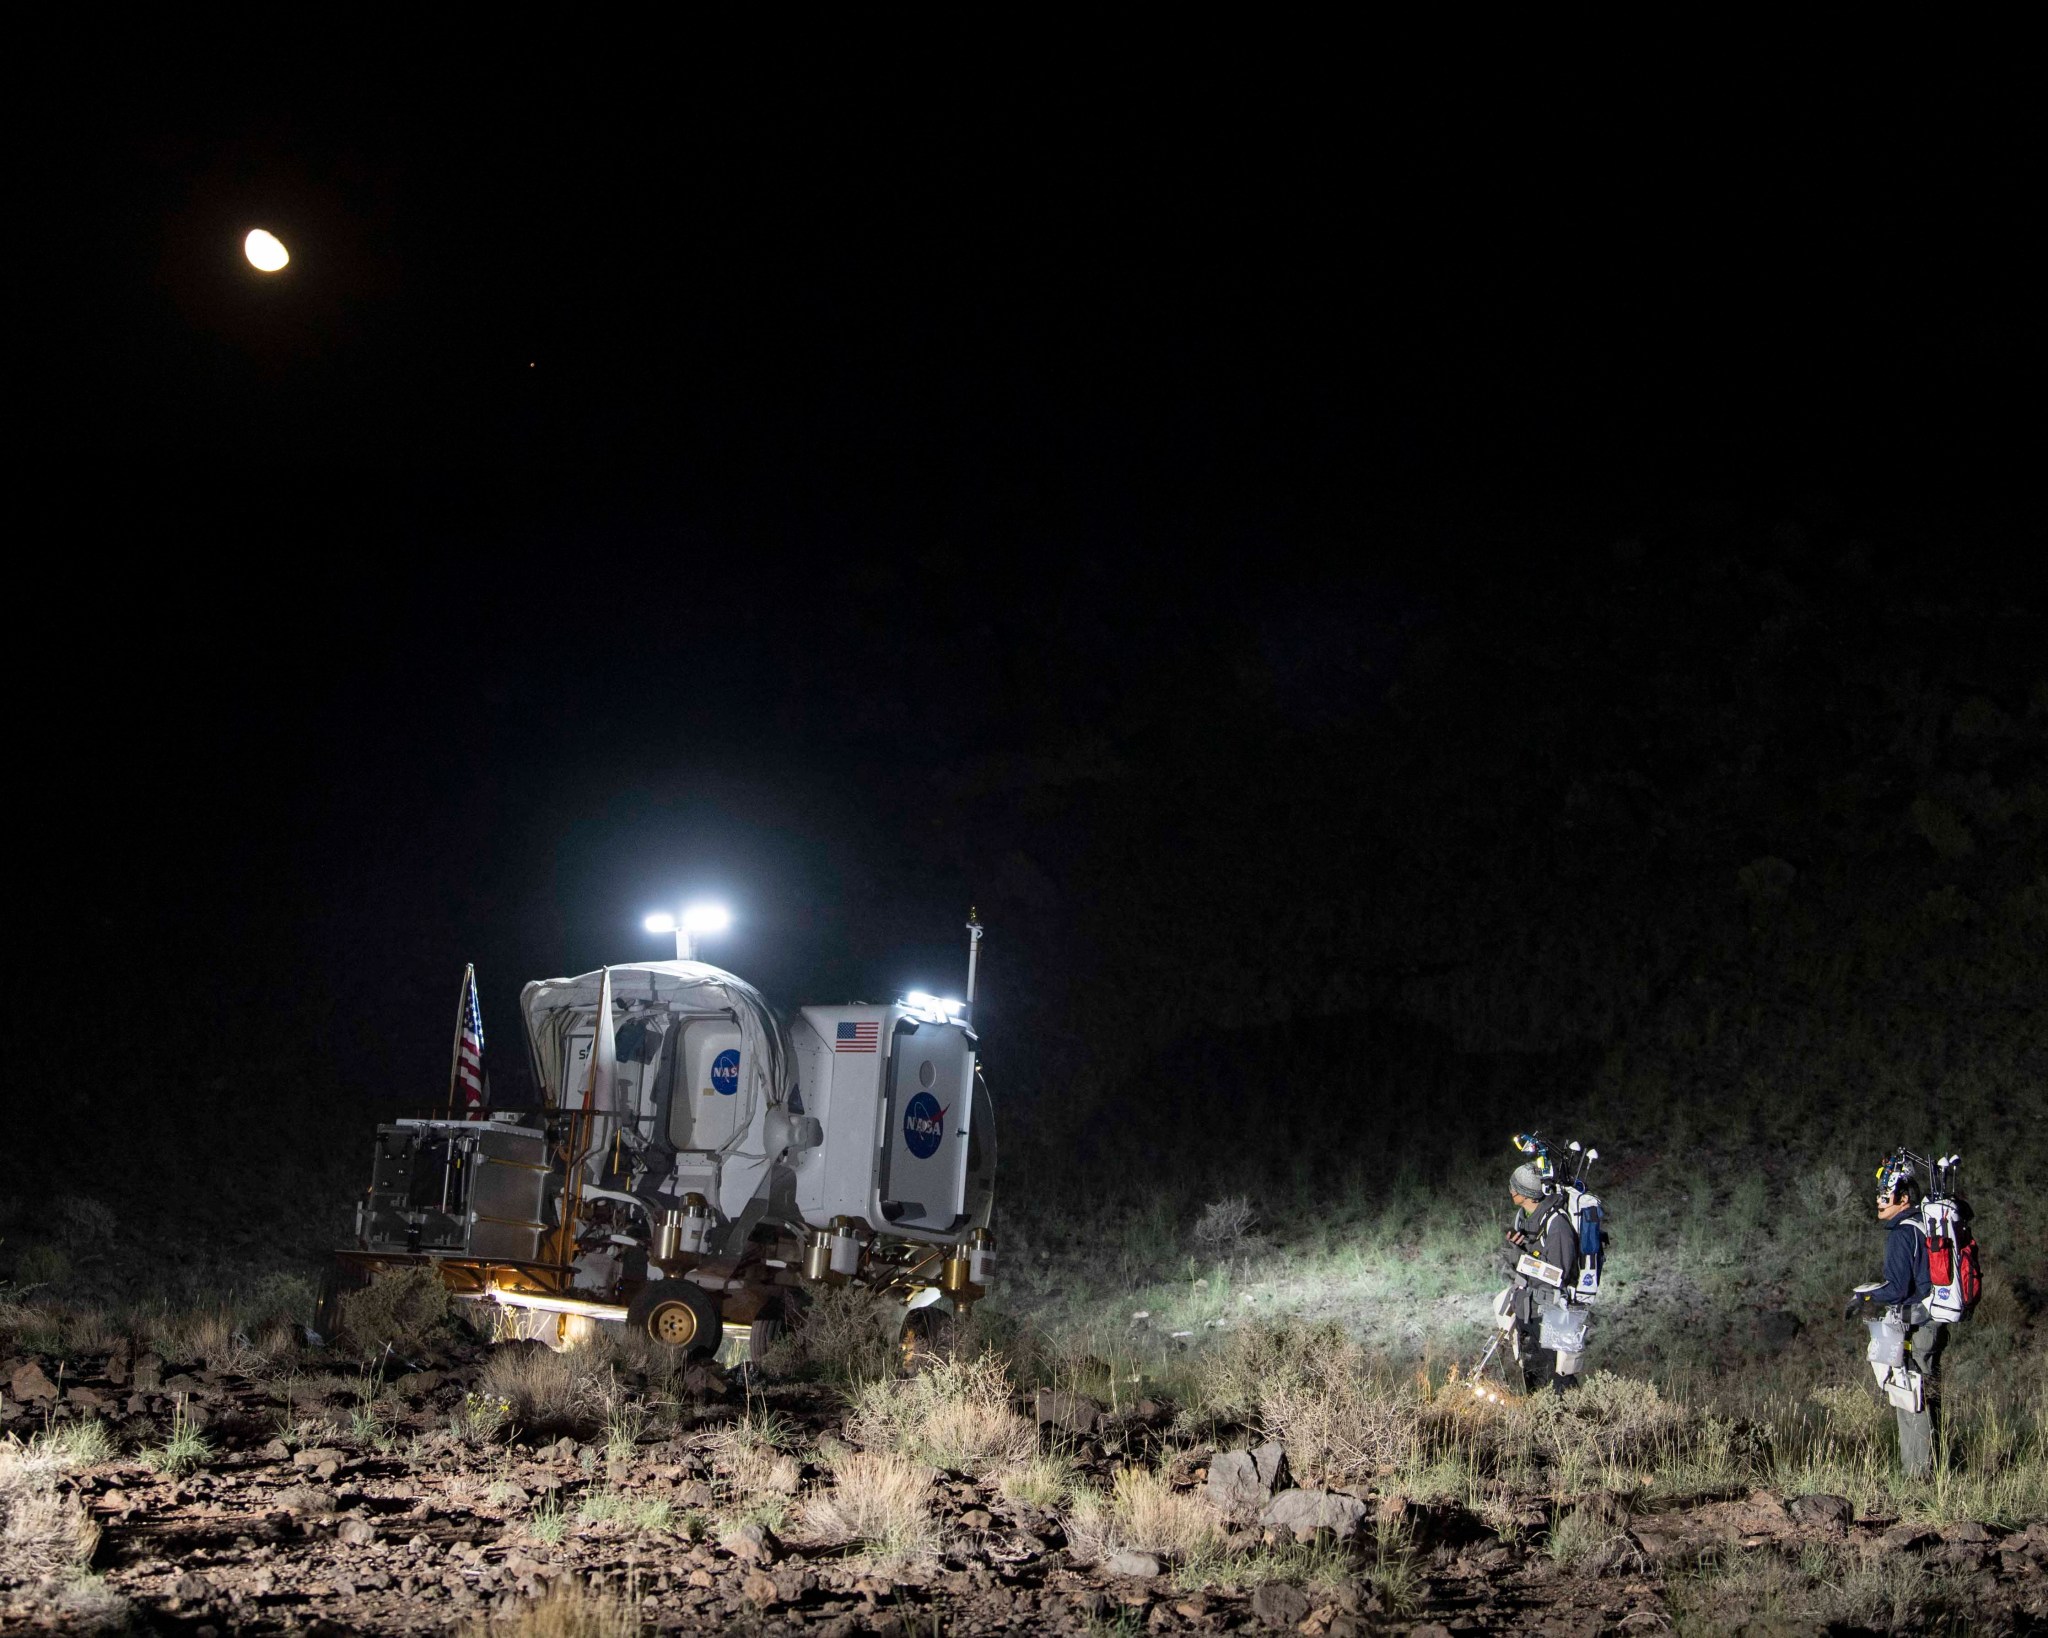 NASA and JAXA teams conducting Artemis field tests in Arizona with astronauts, engineers and scientists to practice in a simulated lunar surface environment.